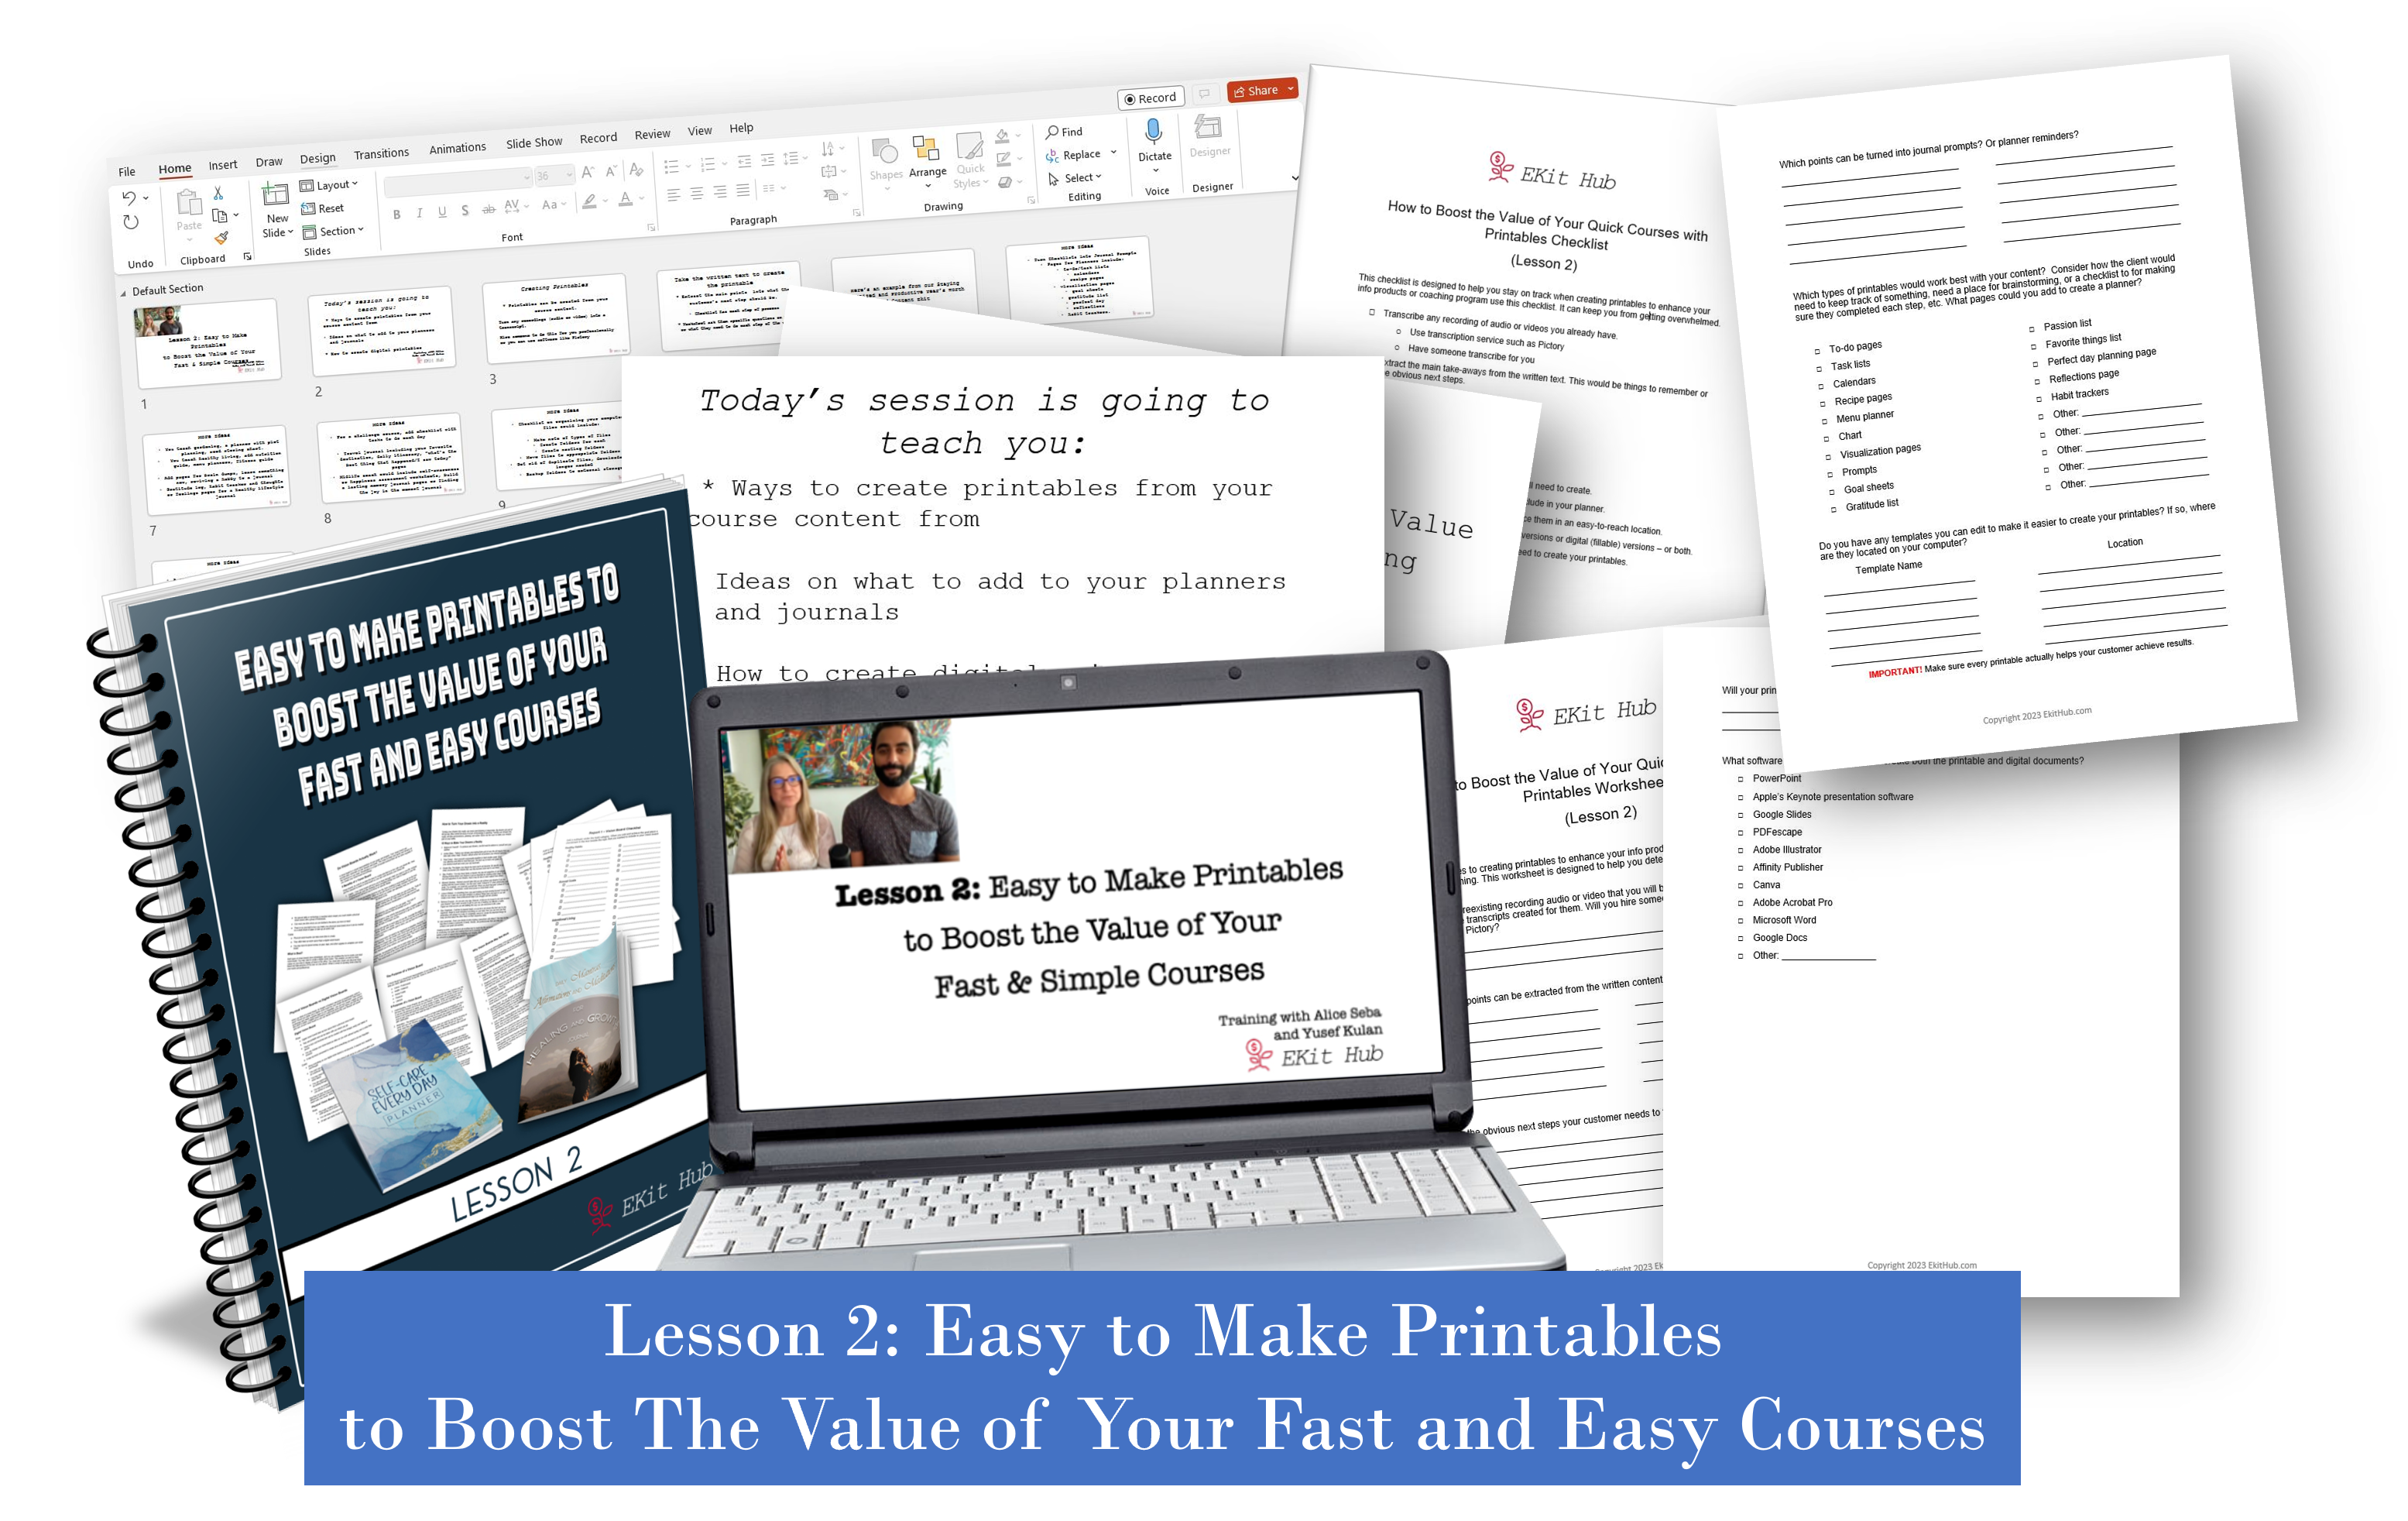 Lesson 2: Easy to Make Printables to Boost the Value of Your Fast & Simple Courses